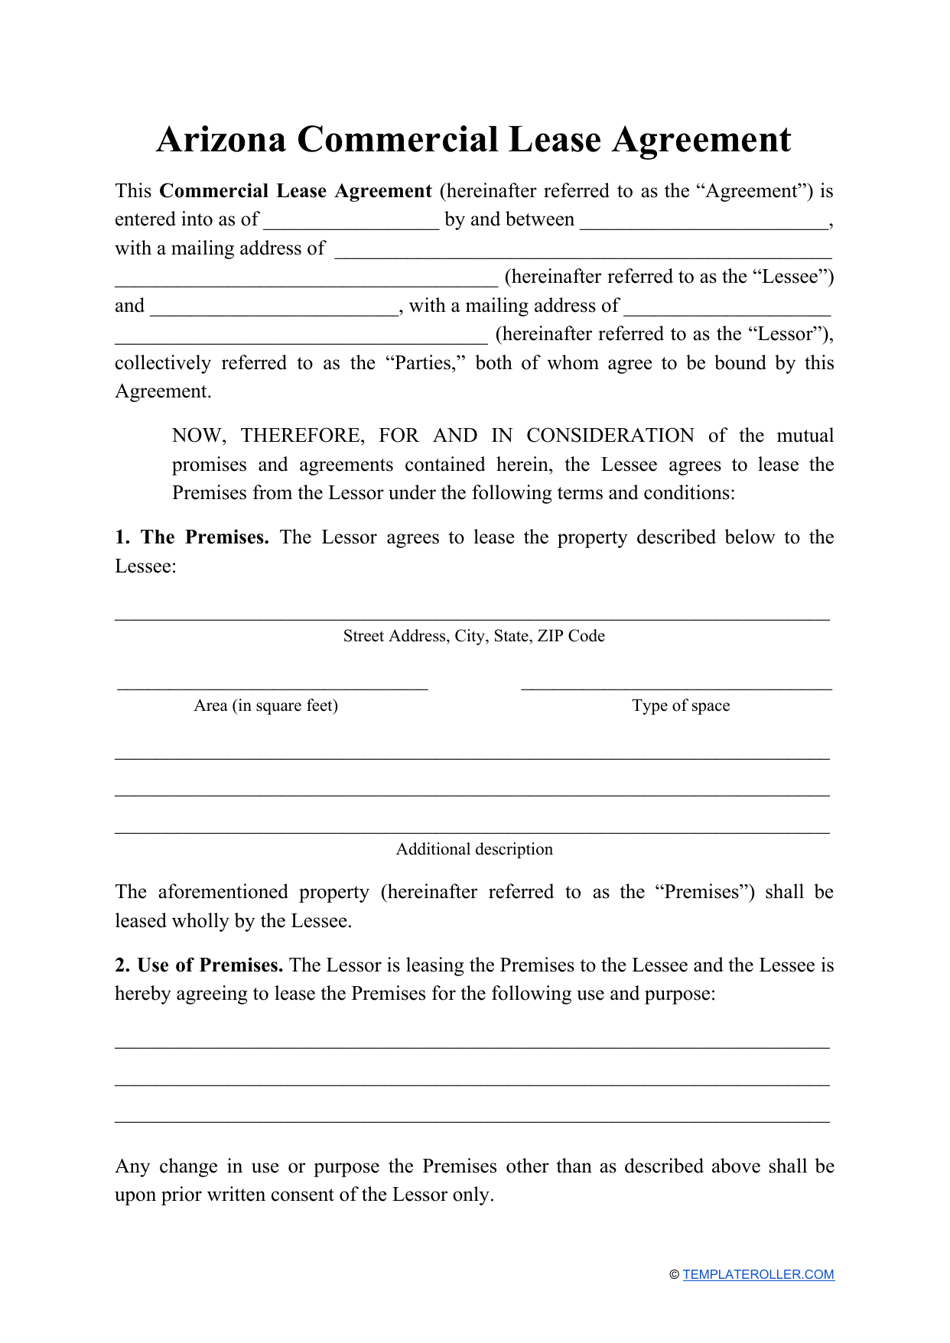 Commercial Lease Agreement Template - Arizona, Page 1